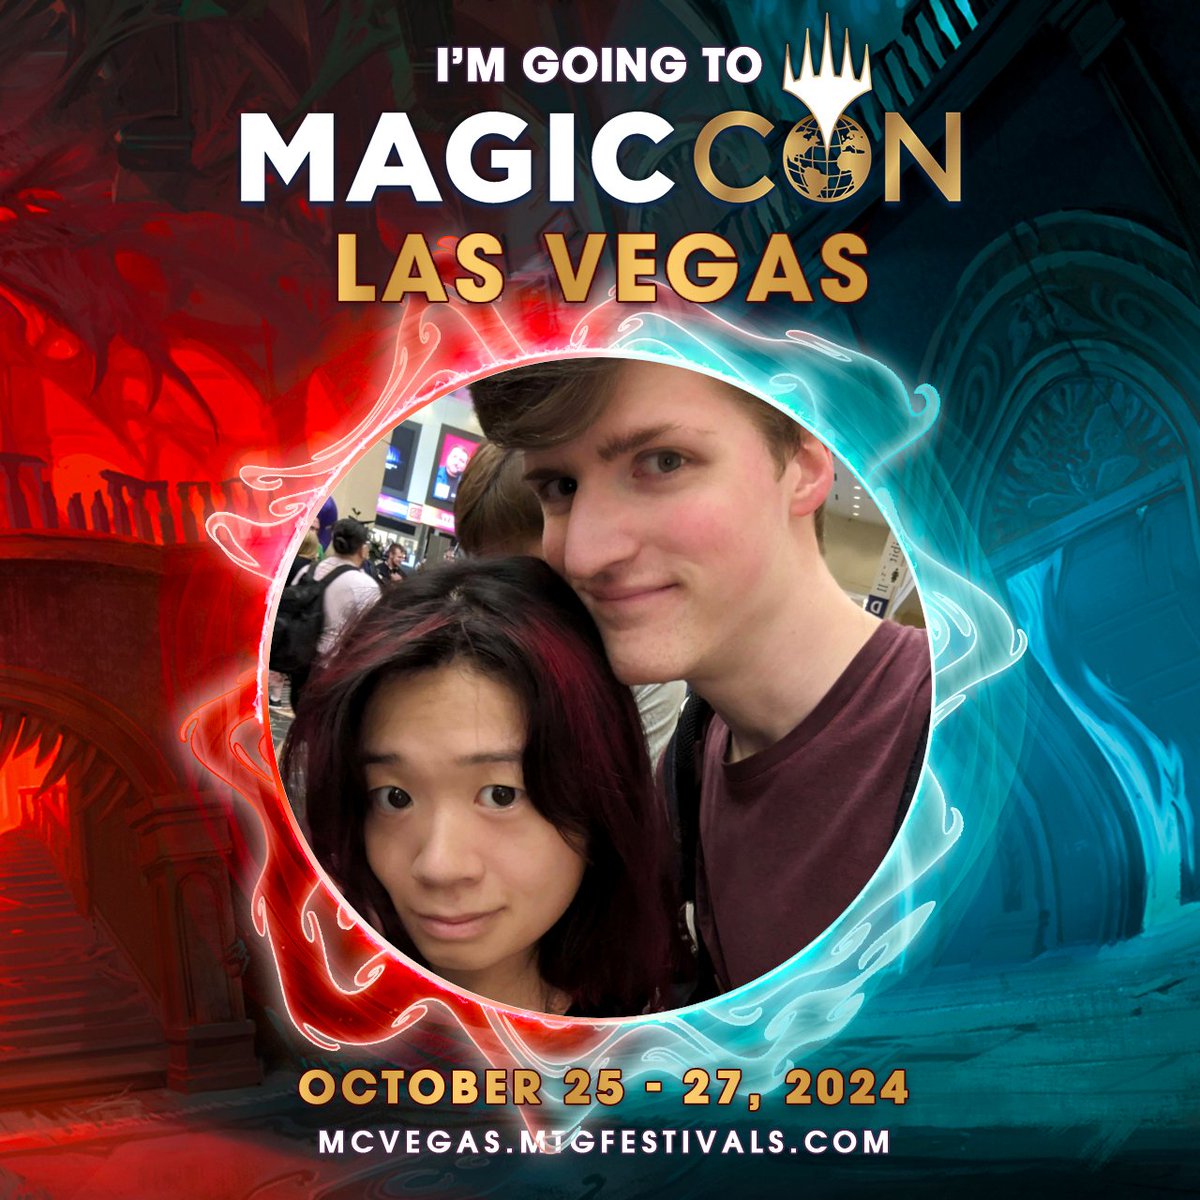 We are going to be featured guests at MagicCon Vegas! More information on where to find us coming soon! Thank you so much @wizards_magic for this incredible opportunity 🥰💖